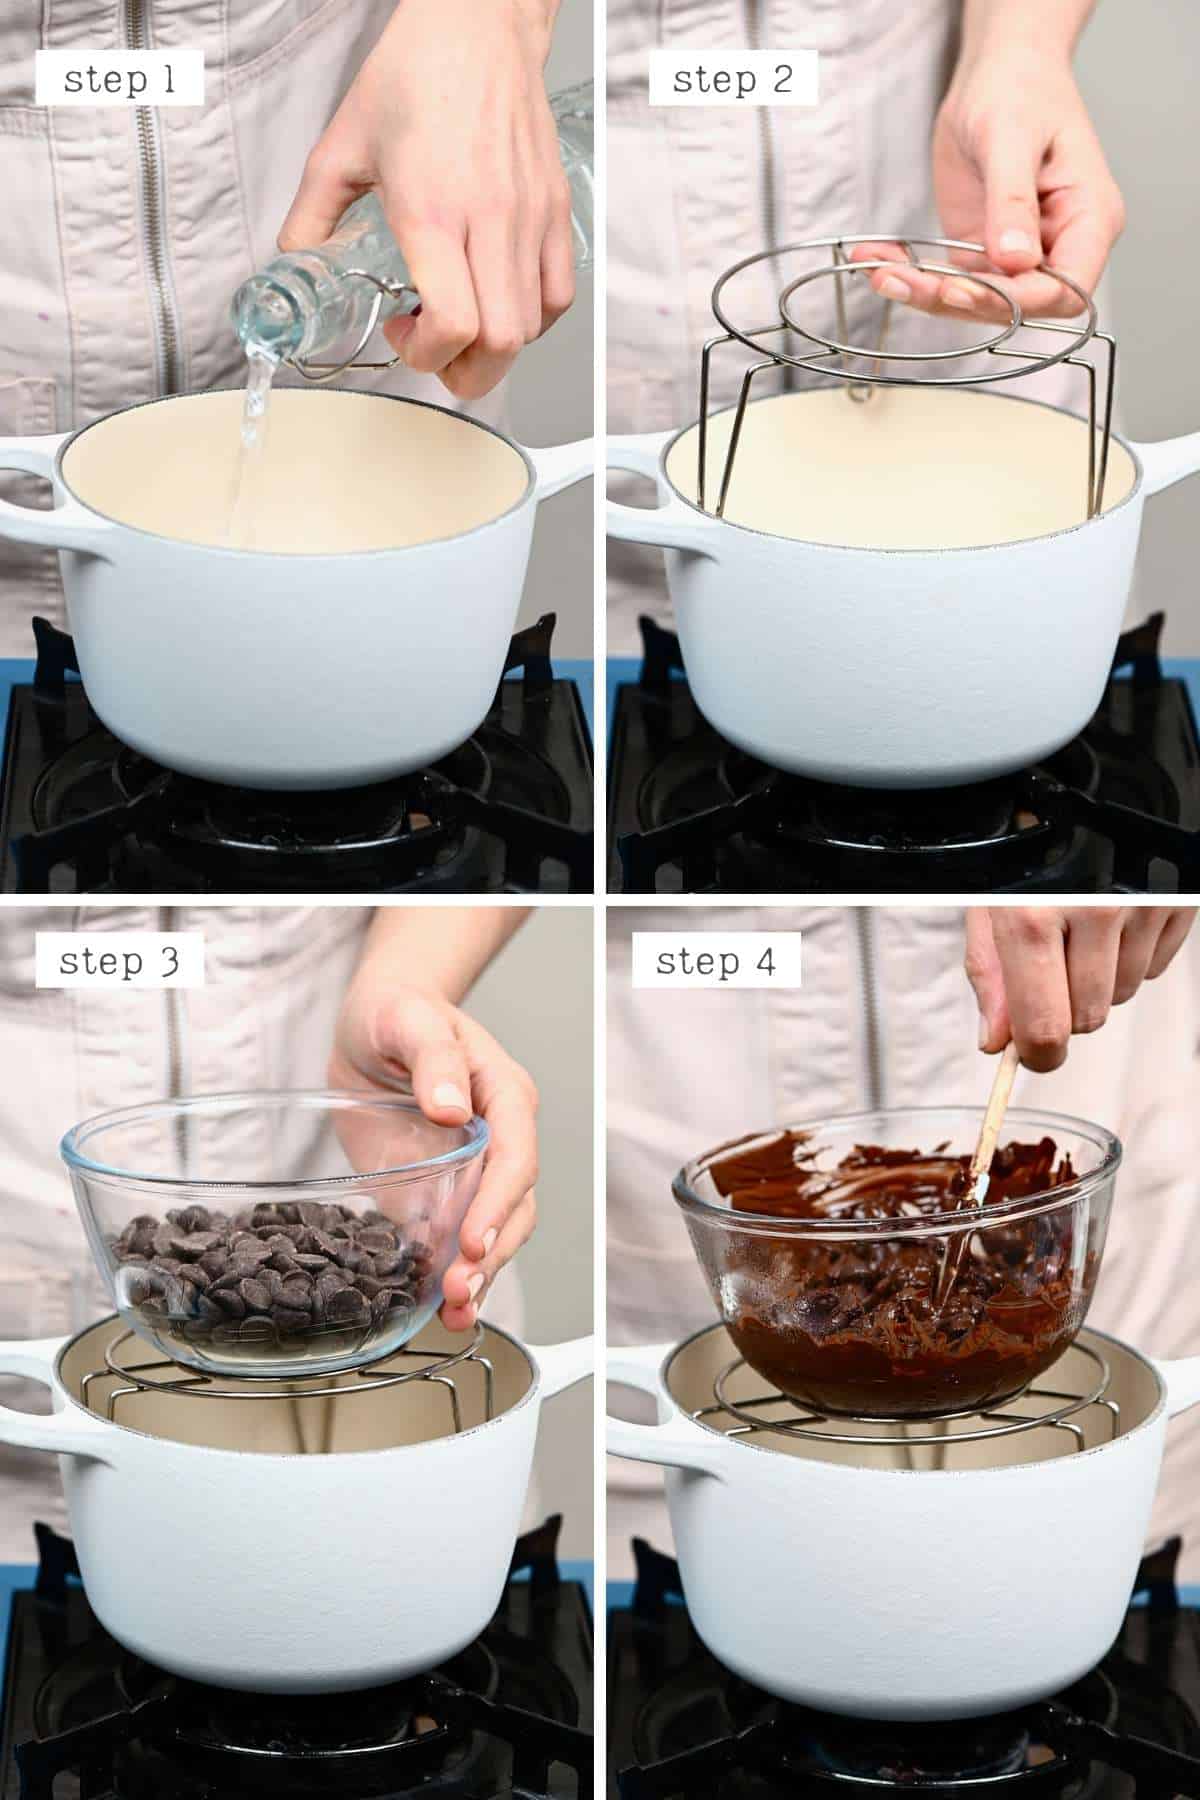 How To Temper Chocolate (Video Tutorial) - Charlotte's Lively Kitchen